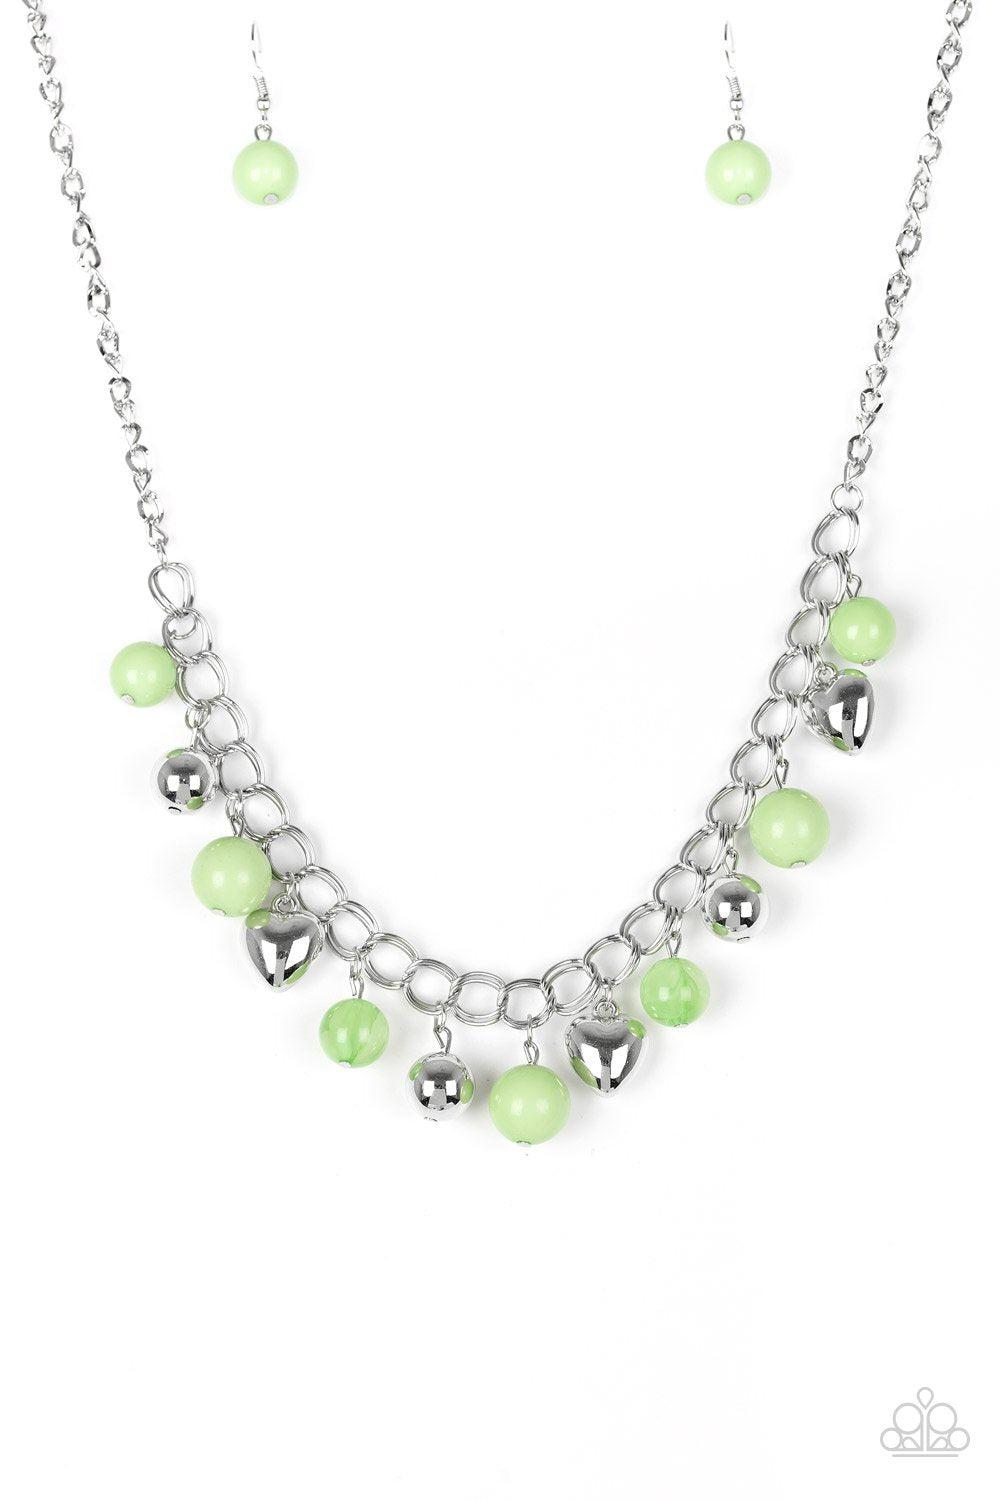 Summer Fling Green and Silver Heart Necklace - Paparazzi Accessories-CarasShop.com - $5 Jewelry by Cara Jewels